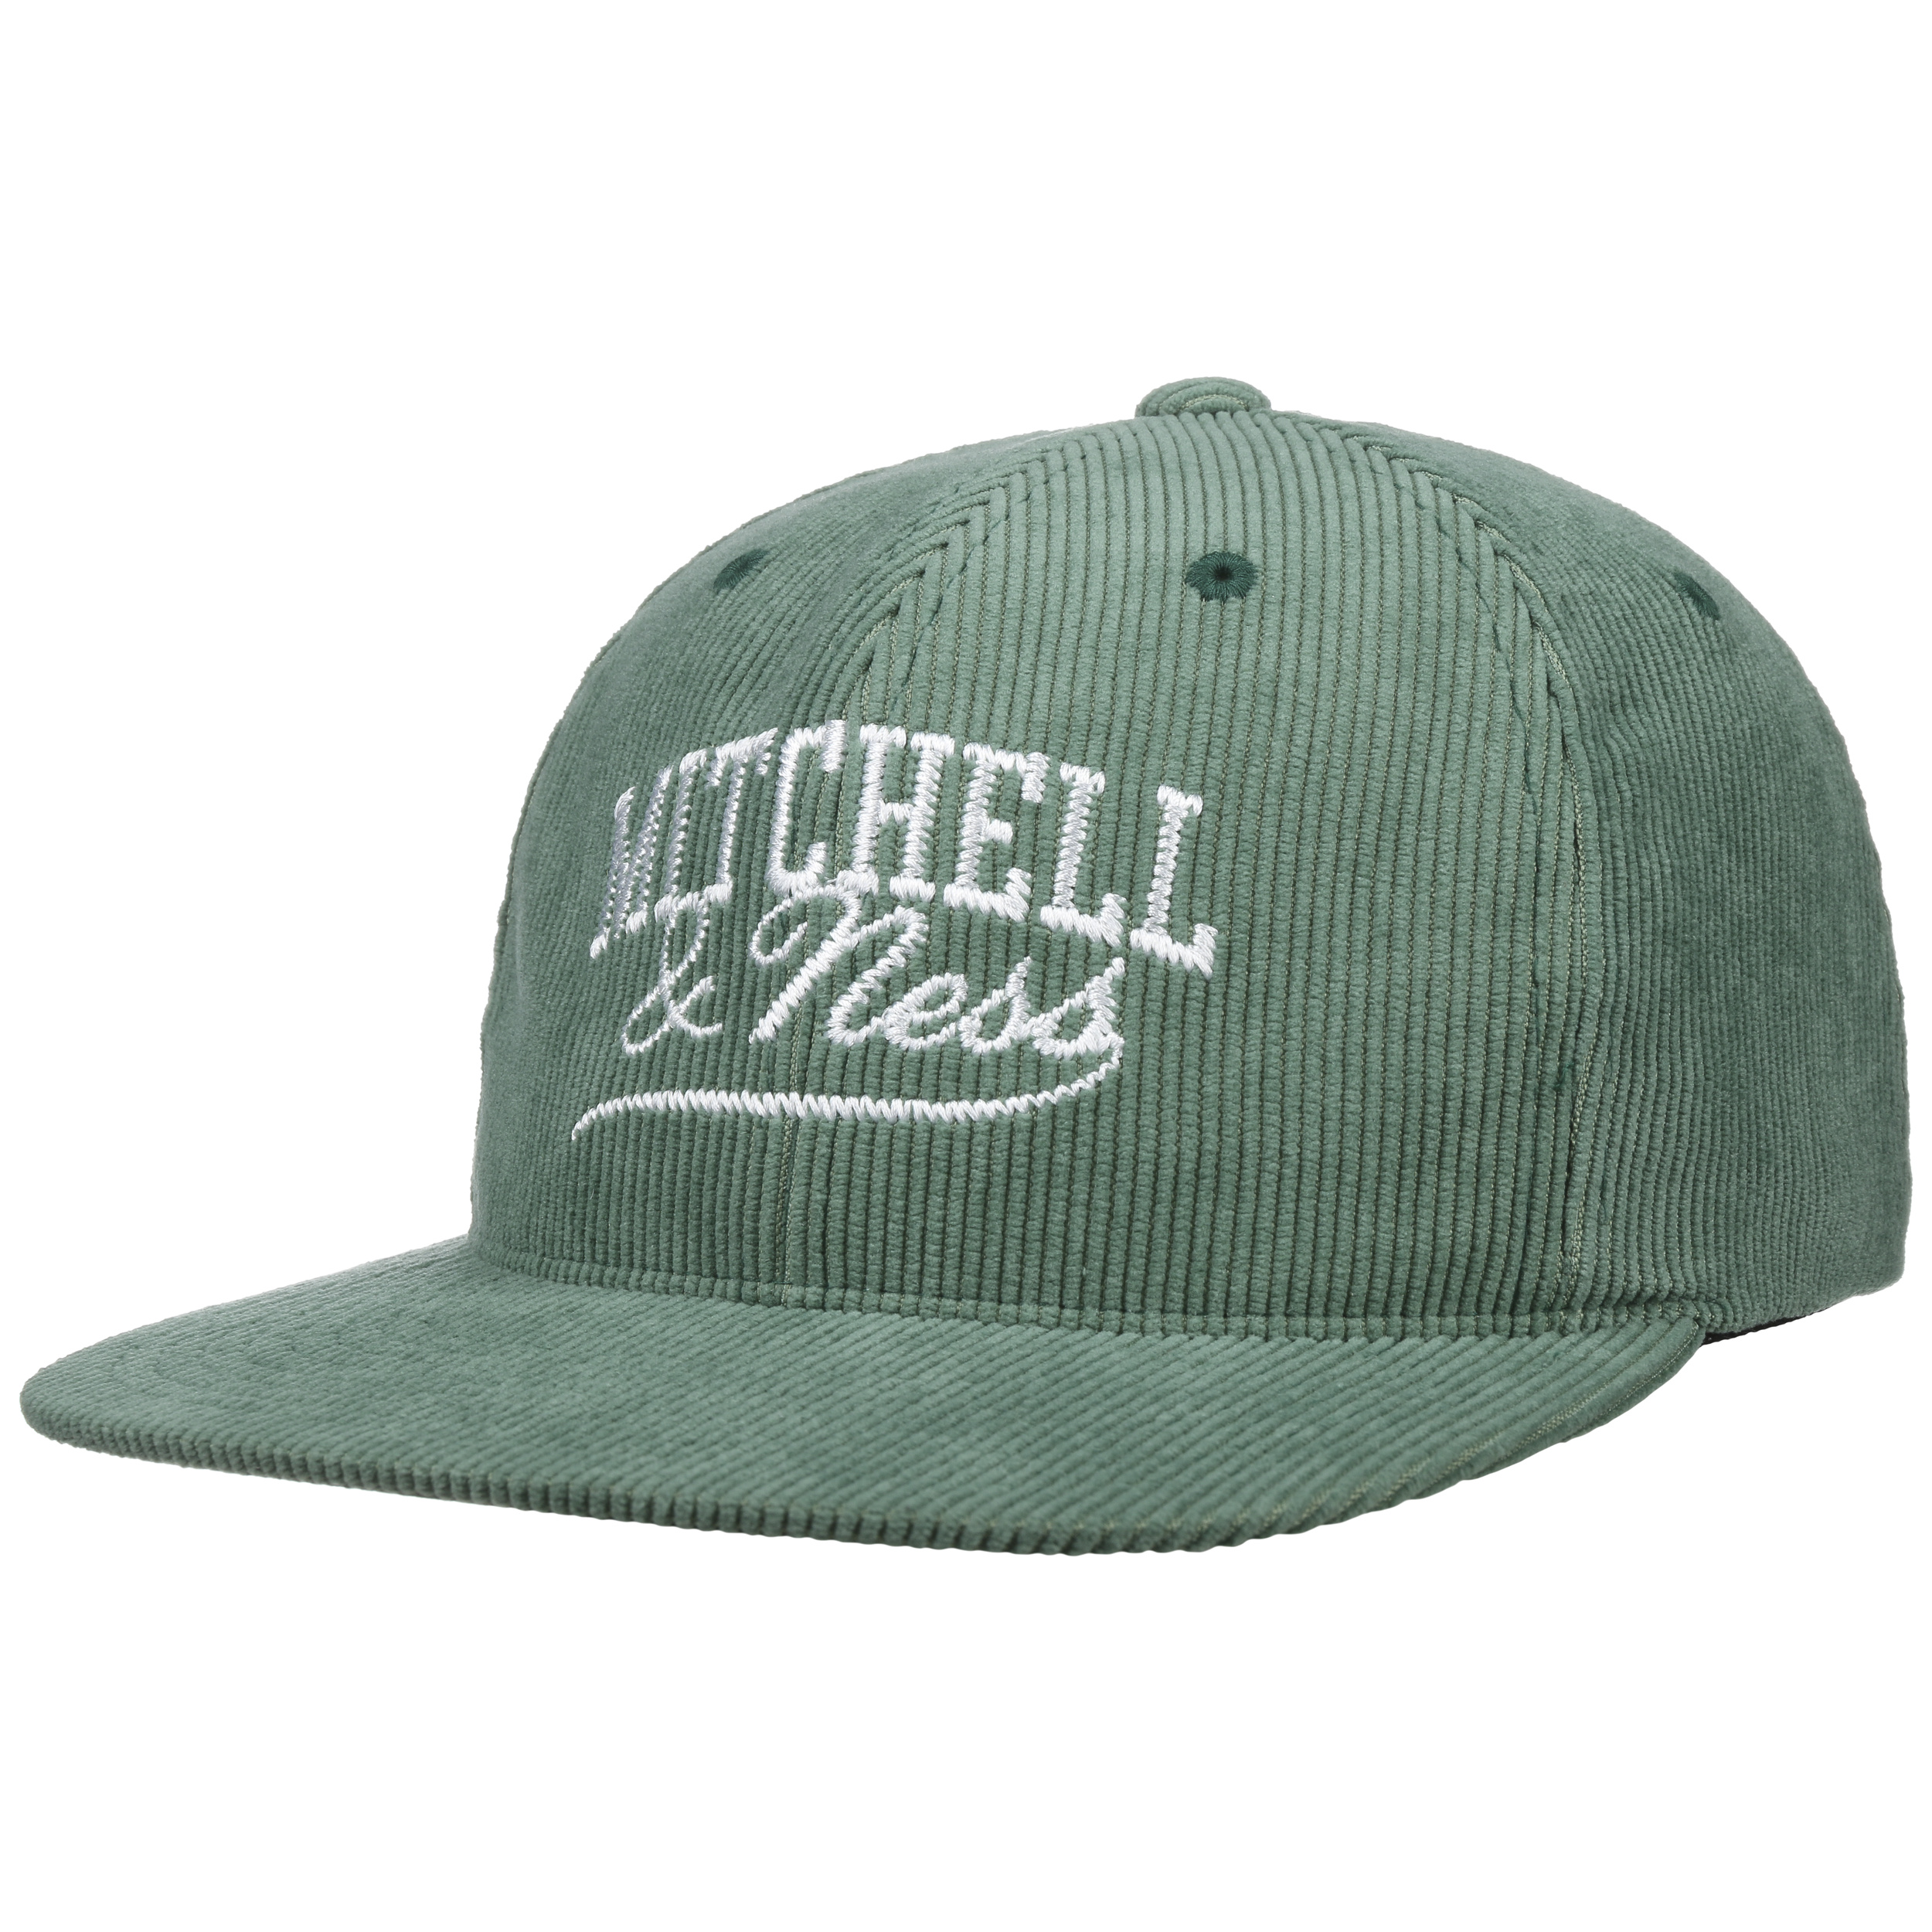 Summer Cord Brand Cap by 36,95 & Ness Mitchell - €